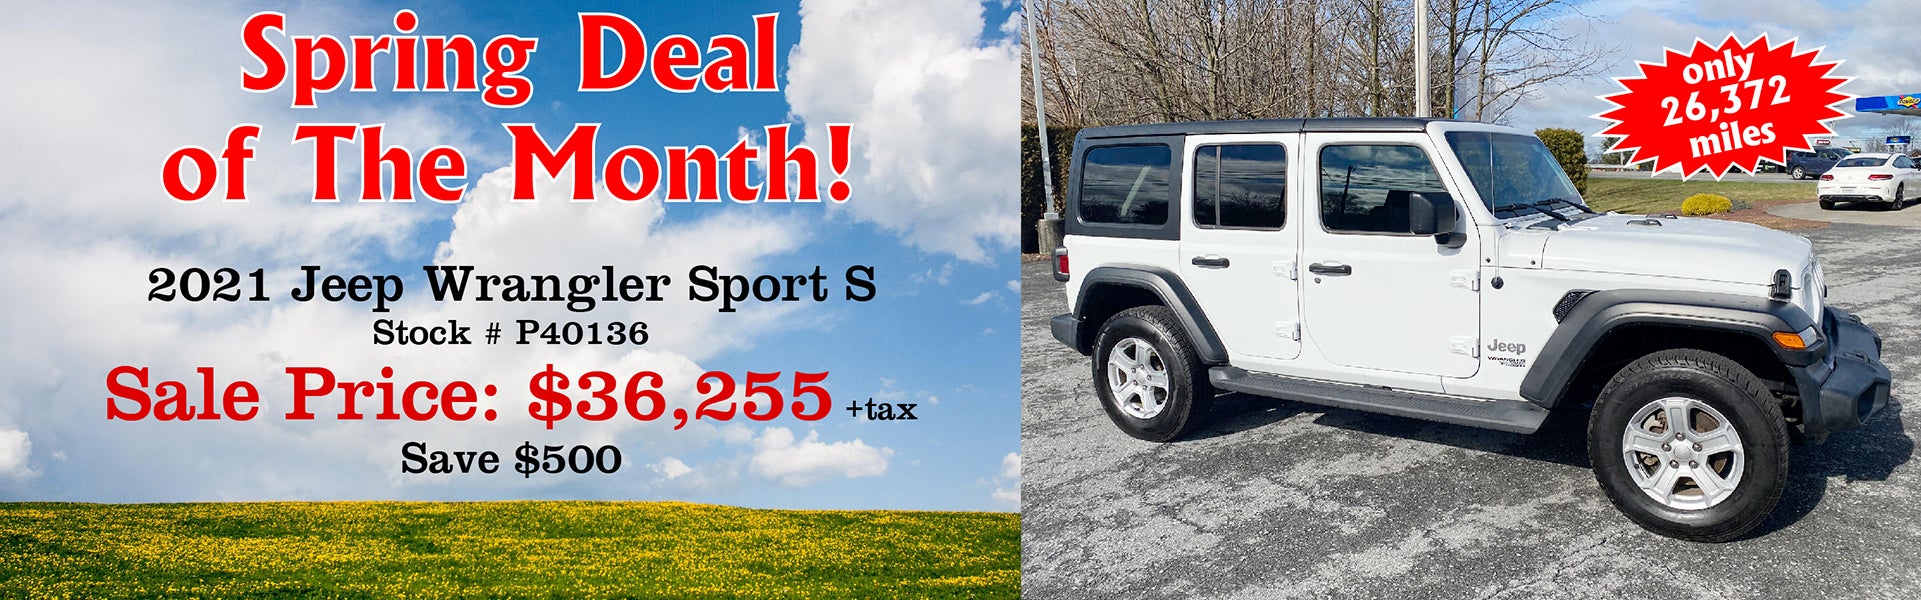 March Special Jeep